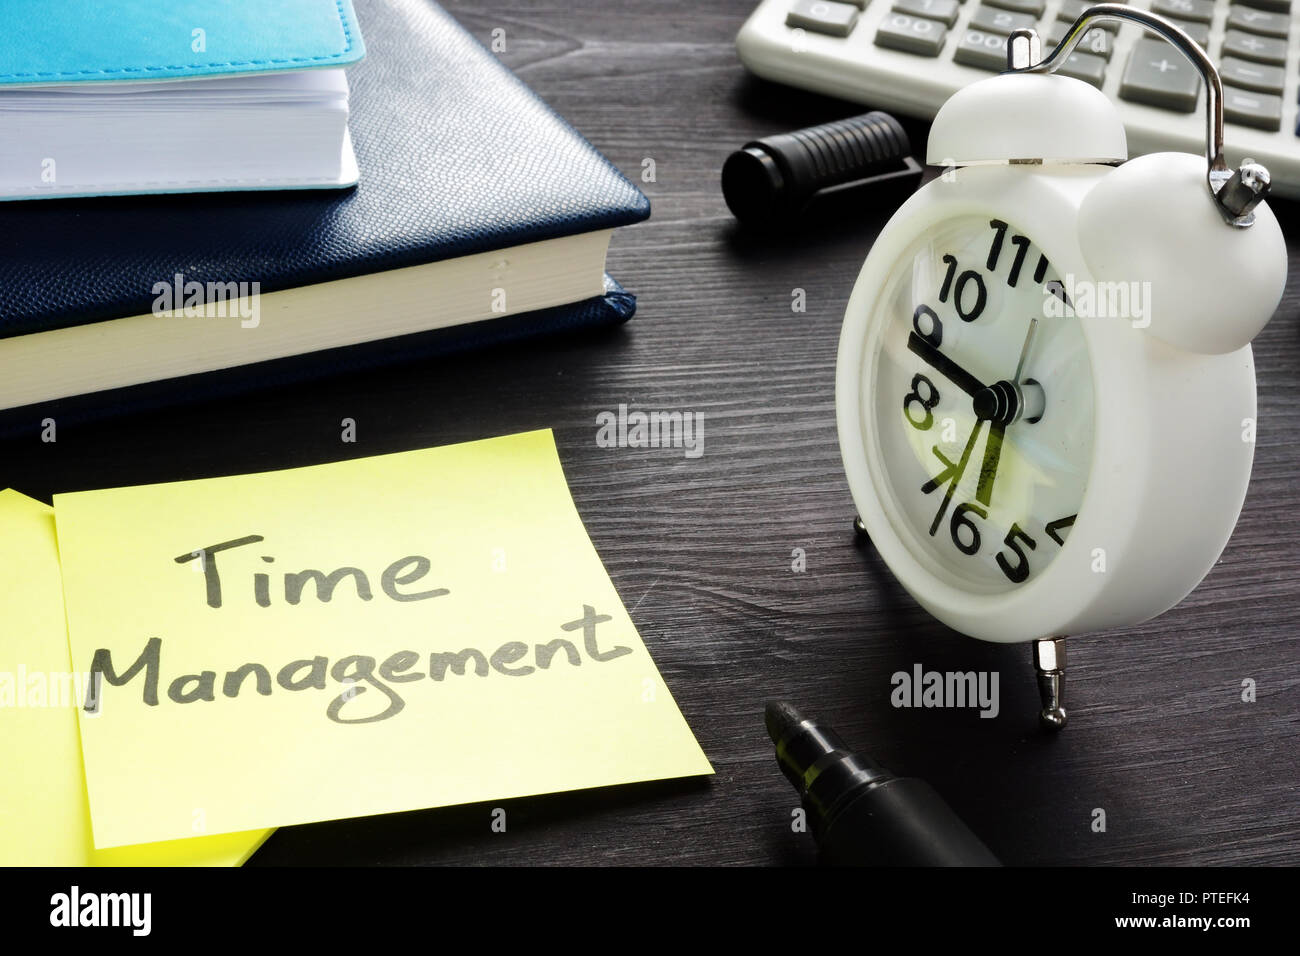 Time management written on a memo and alarm clock. Stock Photo